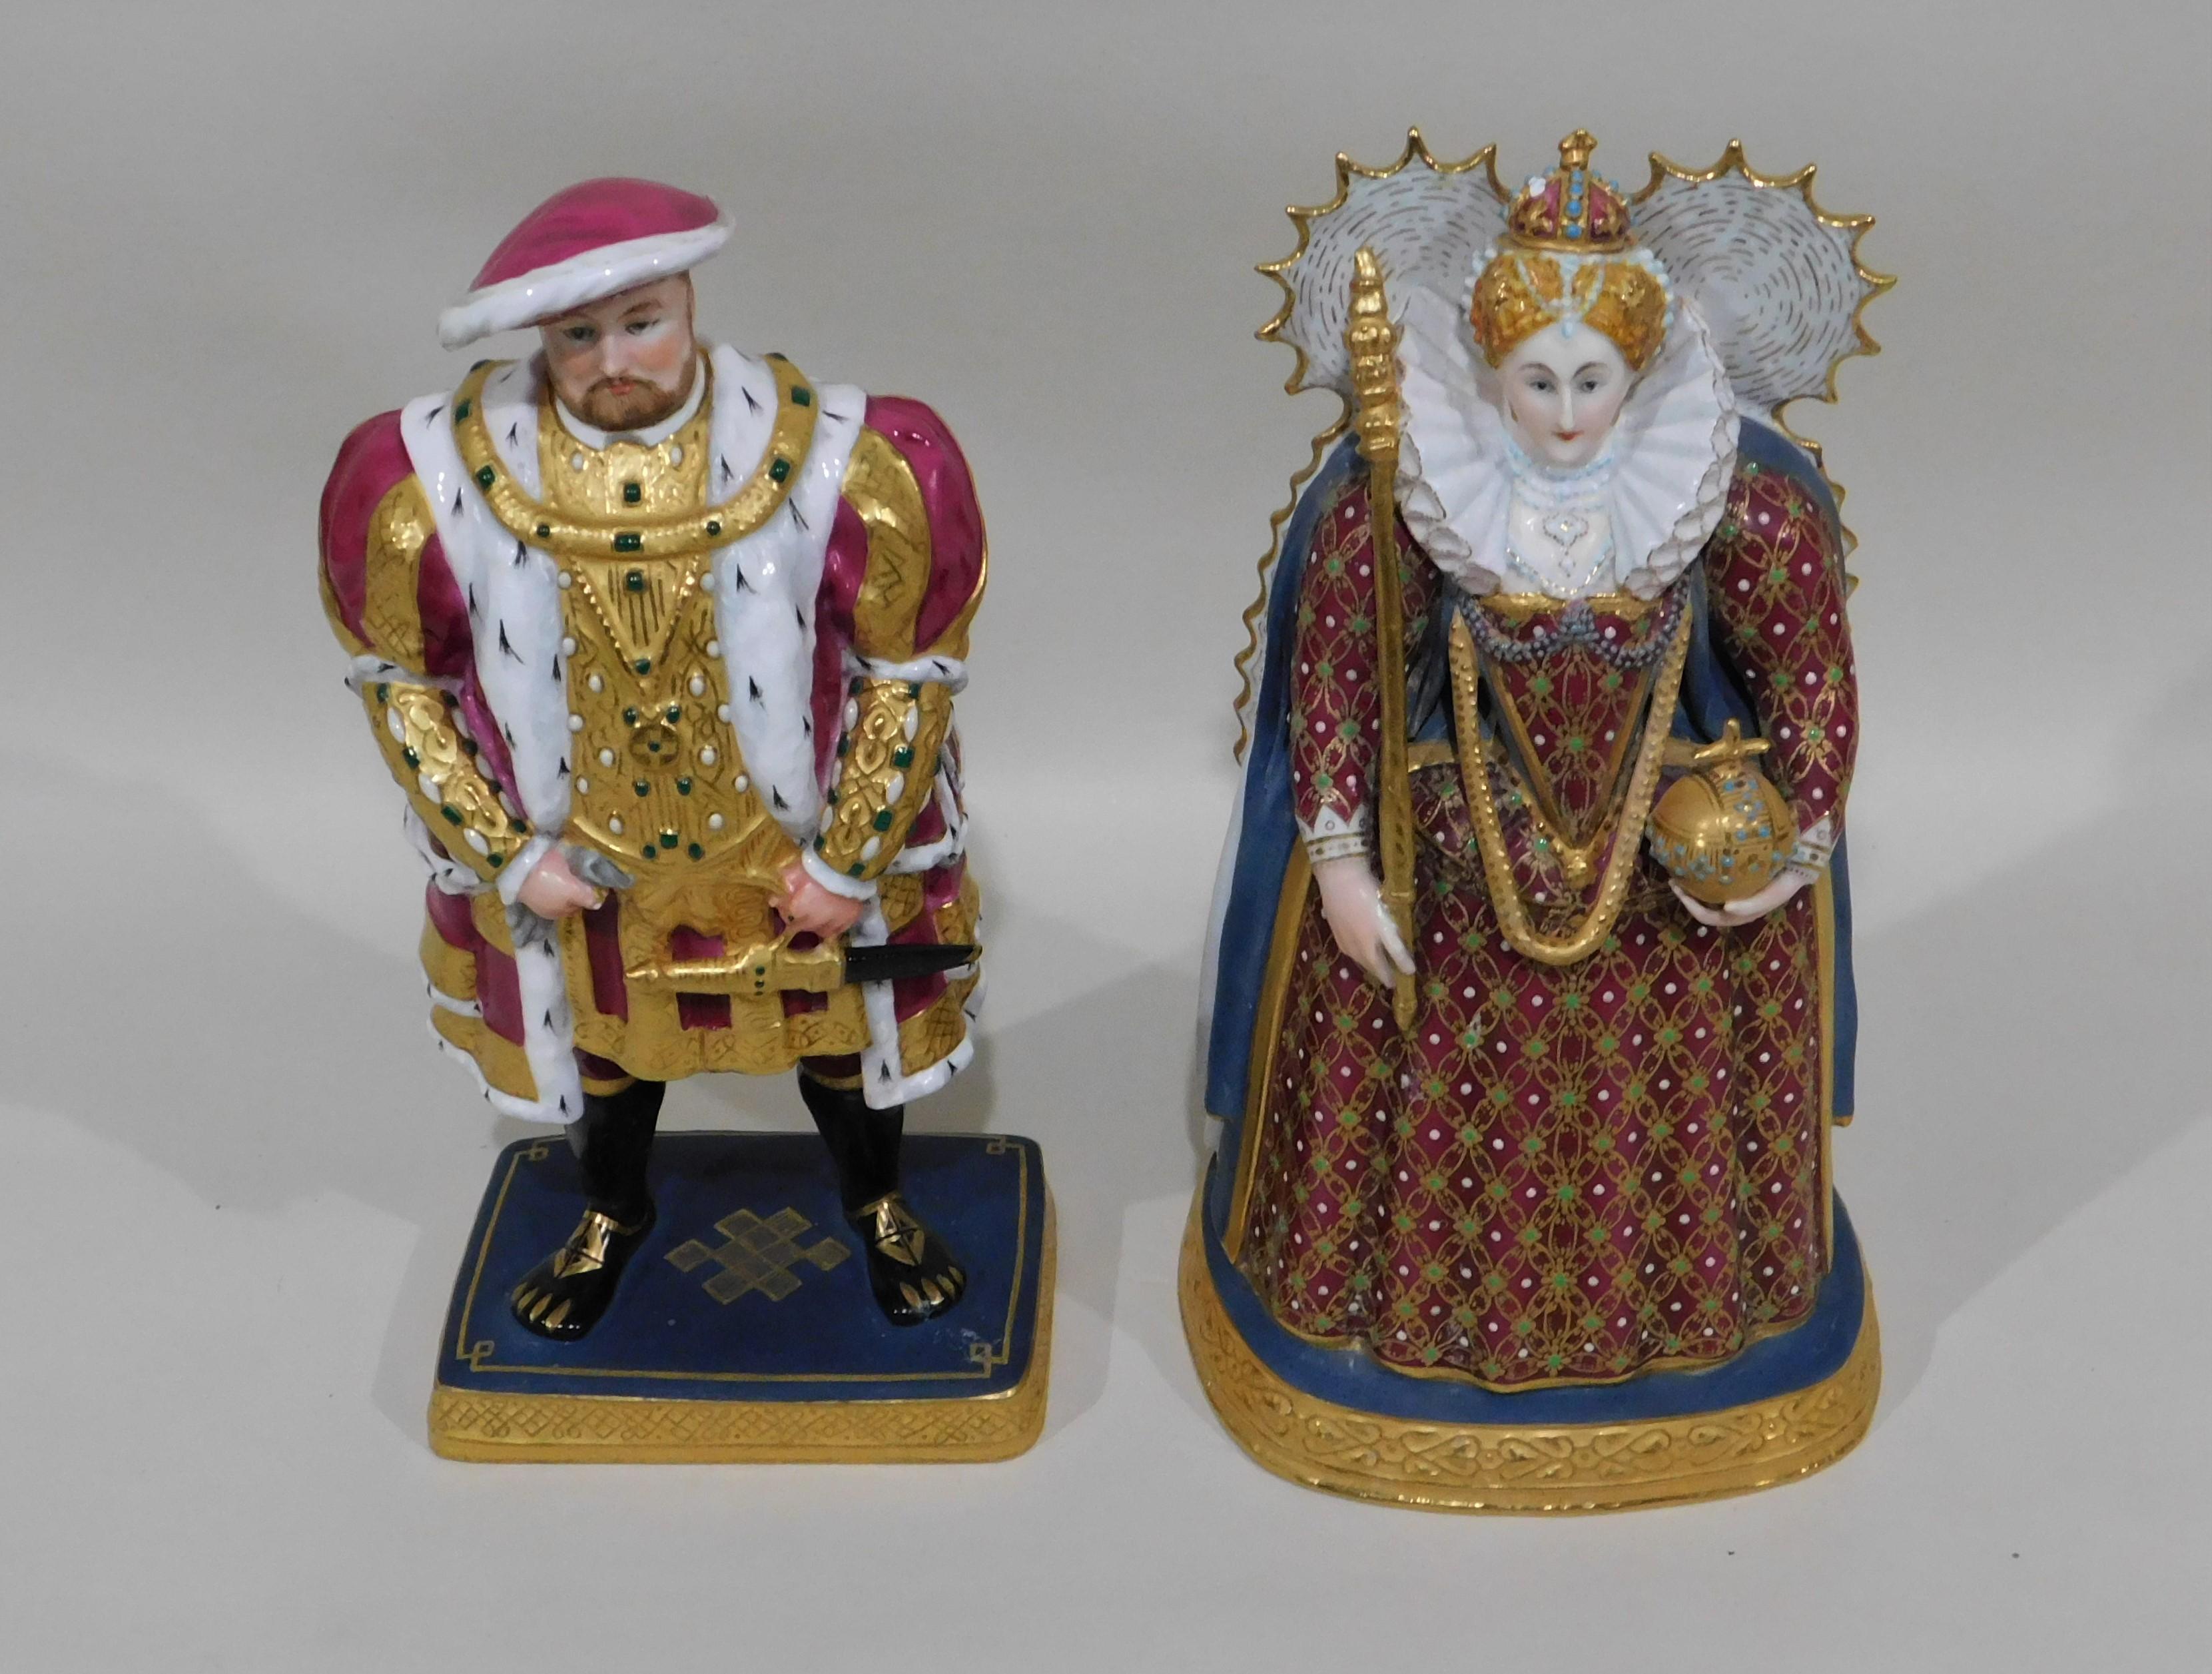 Two rare circa 1920 British Royal Worcester historical figures series ornamental figurines. Henry VIII figure after Holbein number 2367, marked on the bottom with the number 656983 and is nine inches high. Queen Elizabeth figure after a contemporary